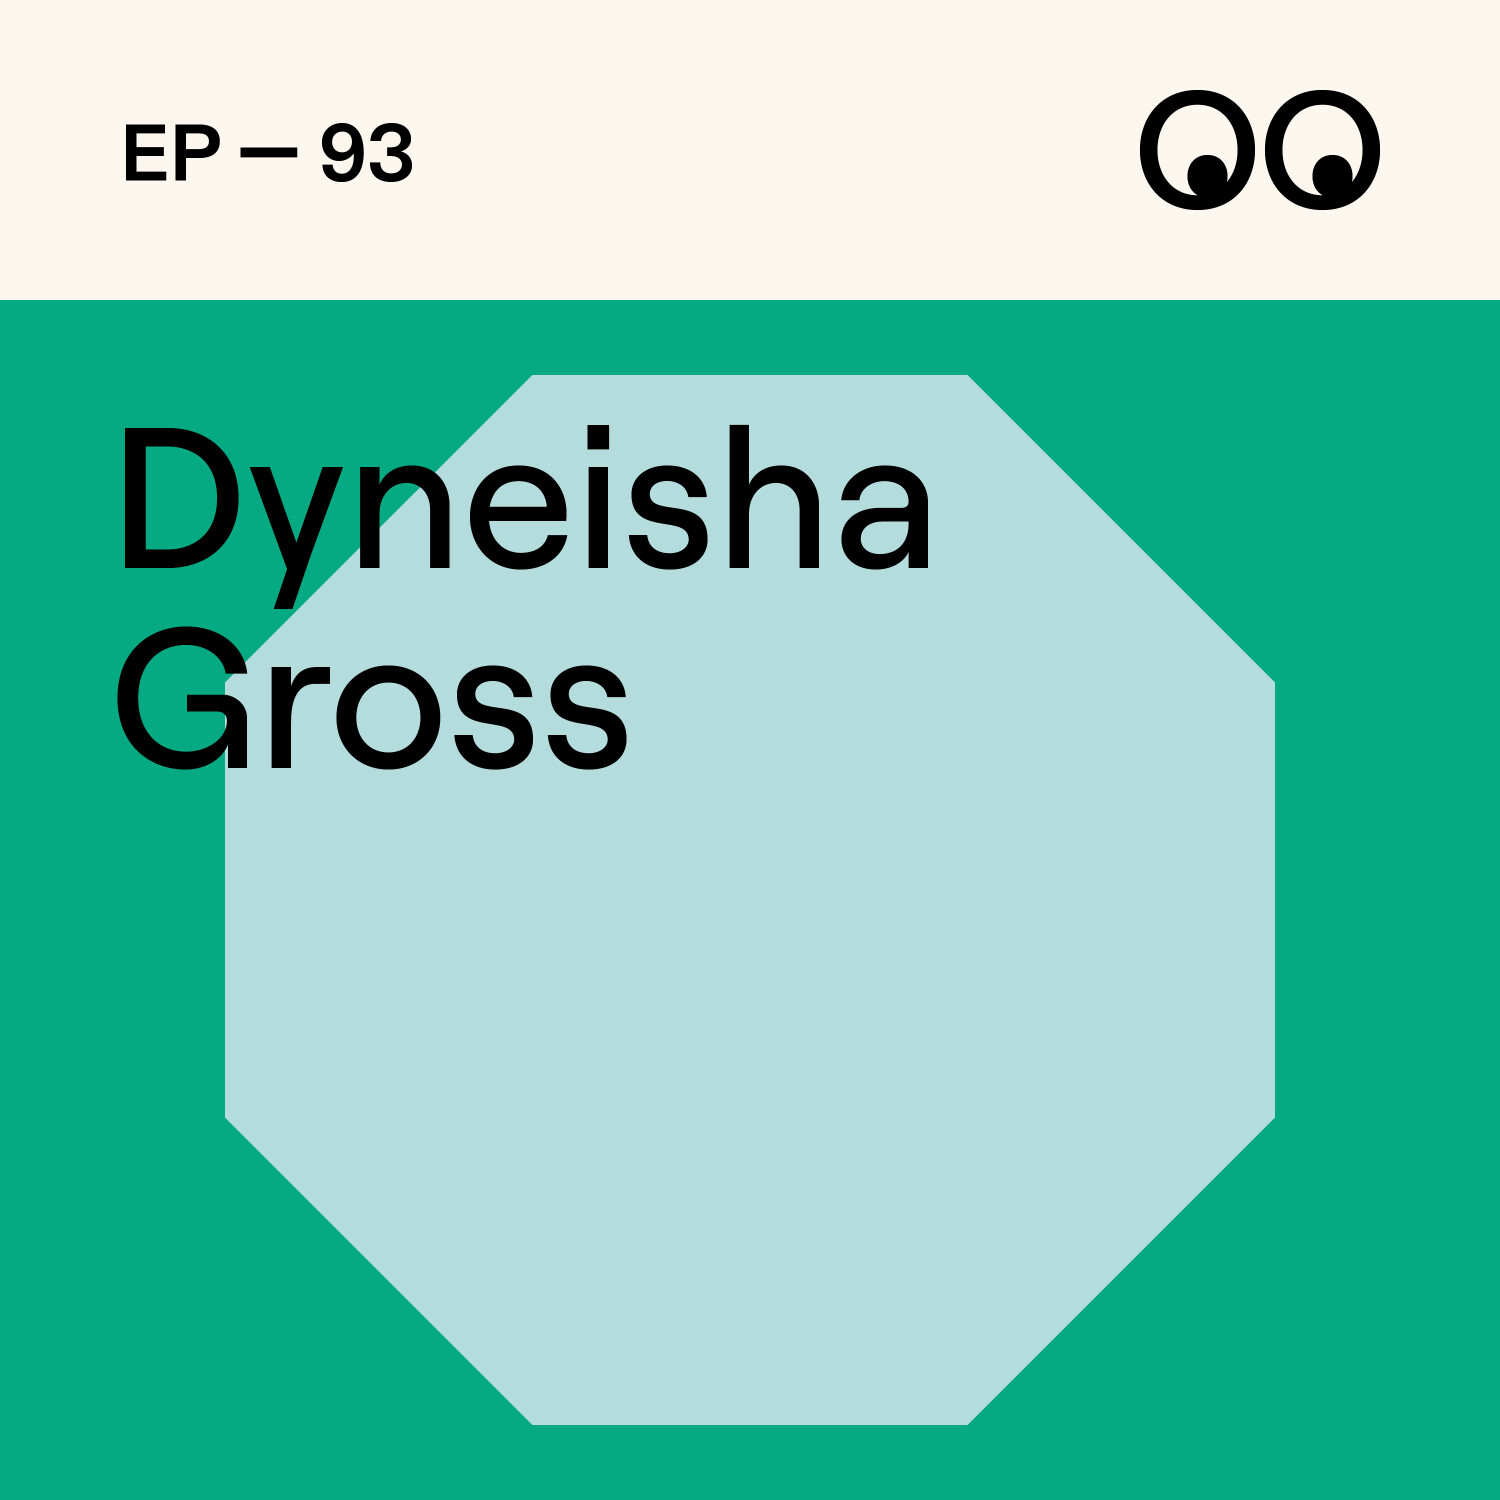 The power of side projects and spreading positivity, with Dyneisha Gross